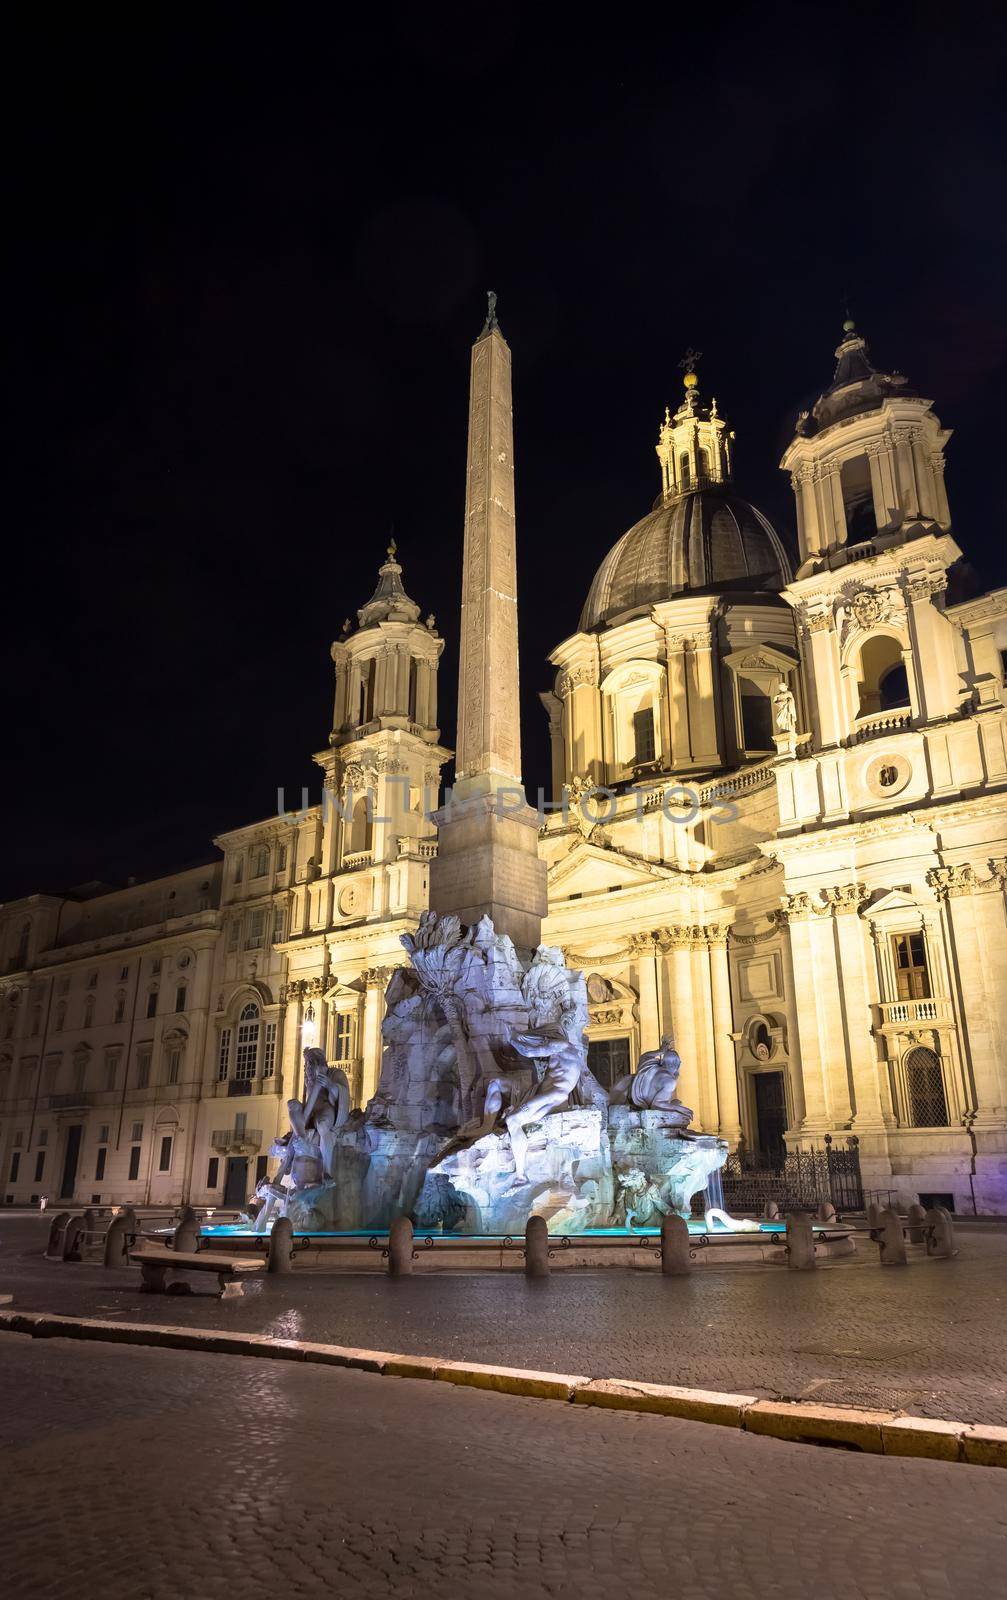 ROME, ITALY - CIRCA AUGUST 2020: Piazza Navona (Navona's Square) with the famous Bernini fountain by night.